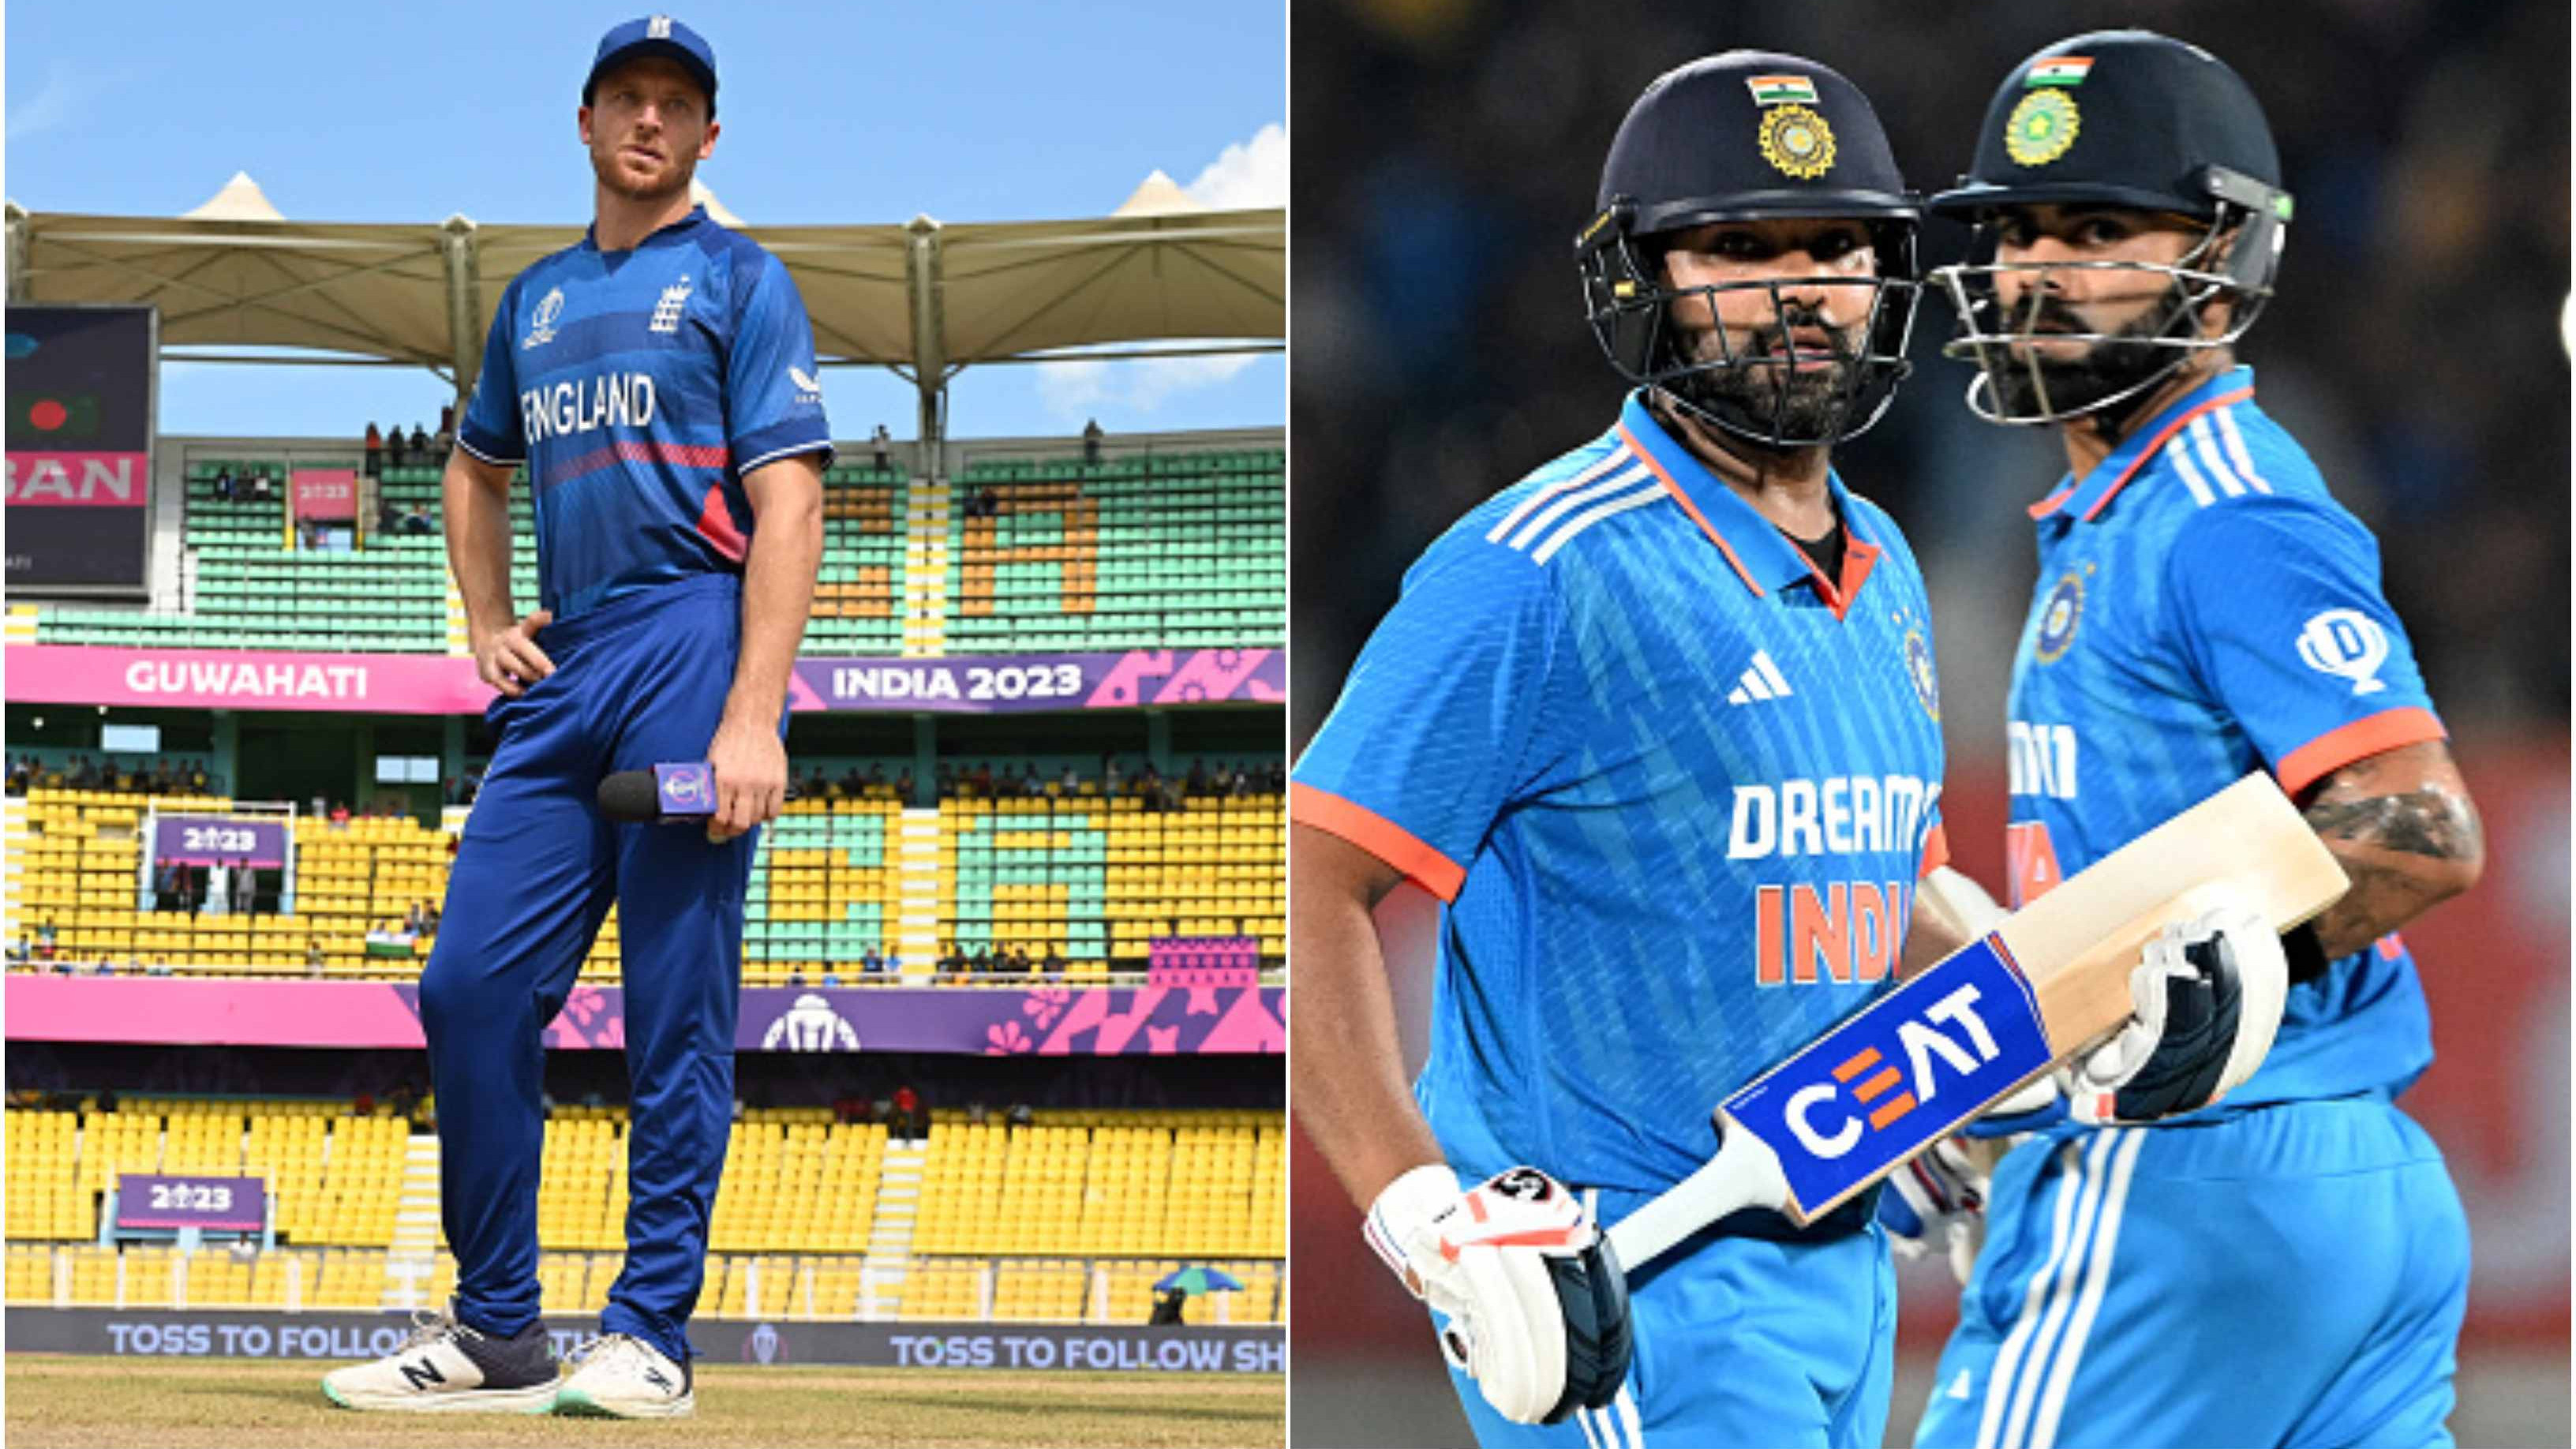 CWC 2023: Jos Buttler picks first five players in his dream ODI XI; one Indian included